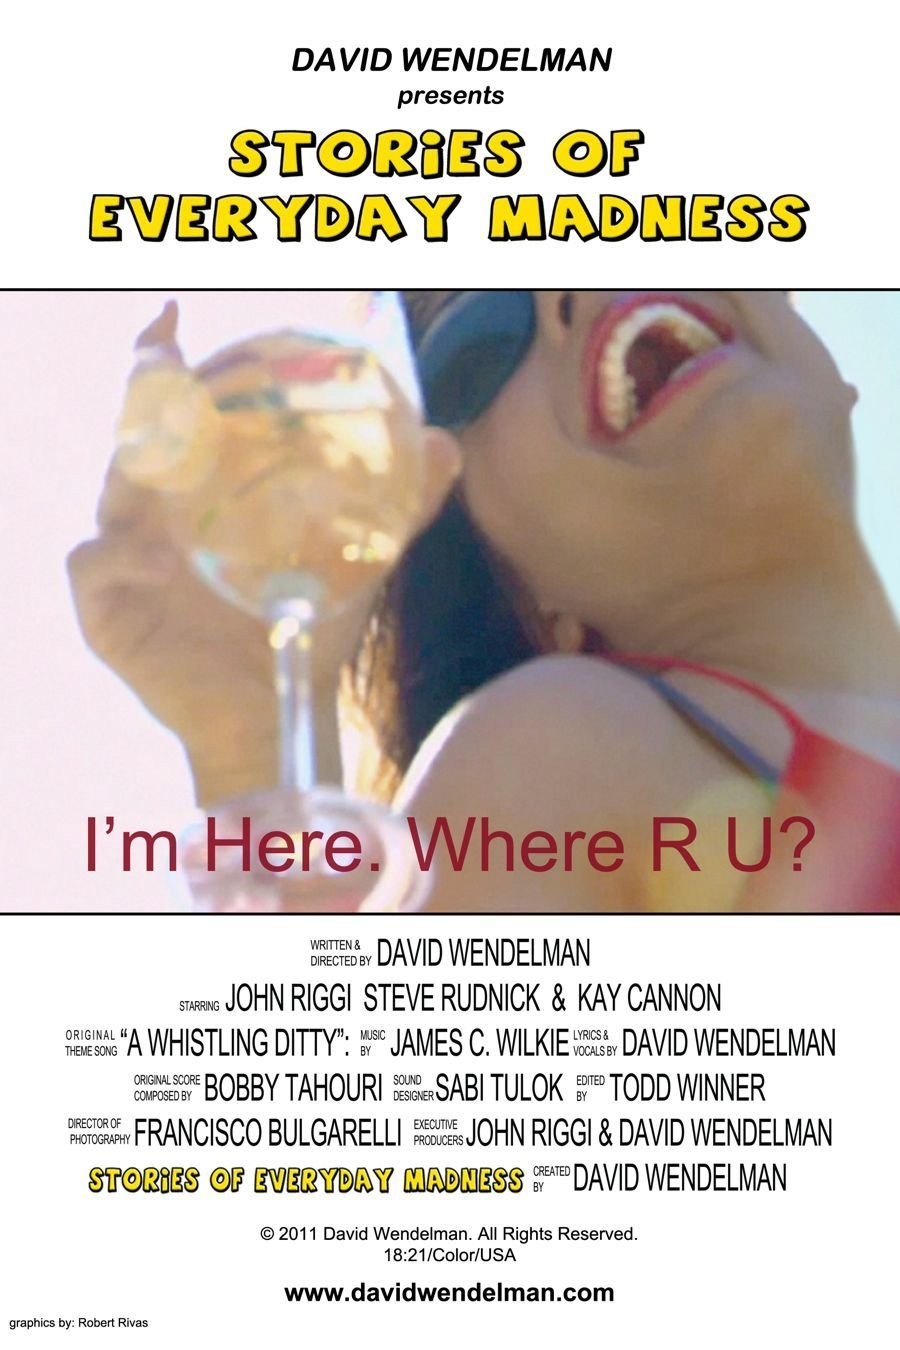 Extra Large Movie Poster Image for I'm Here. Where R U?